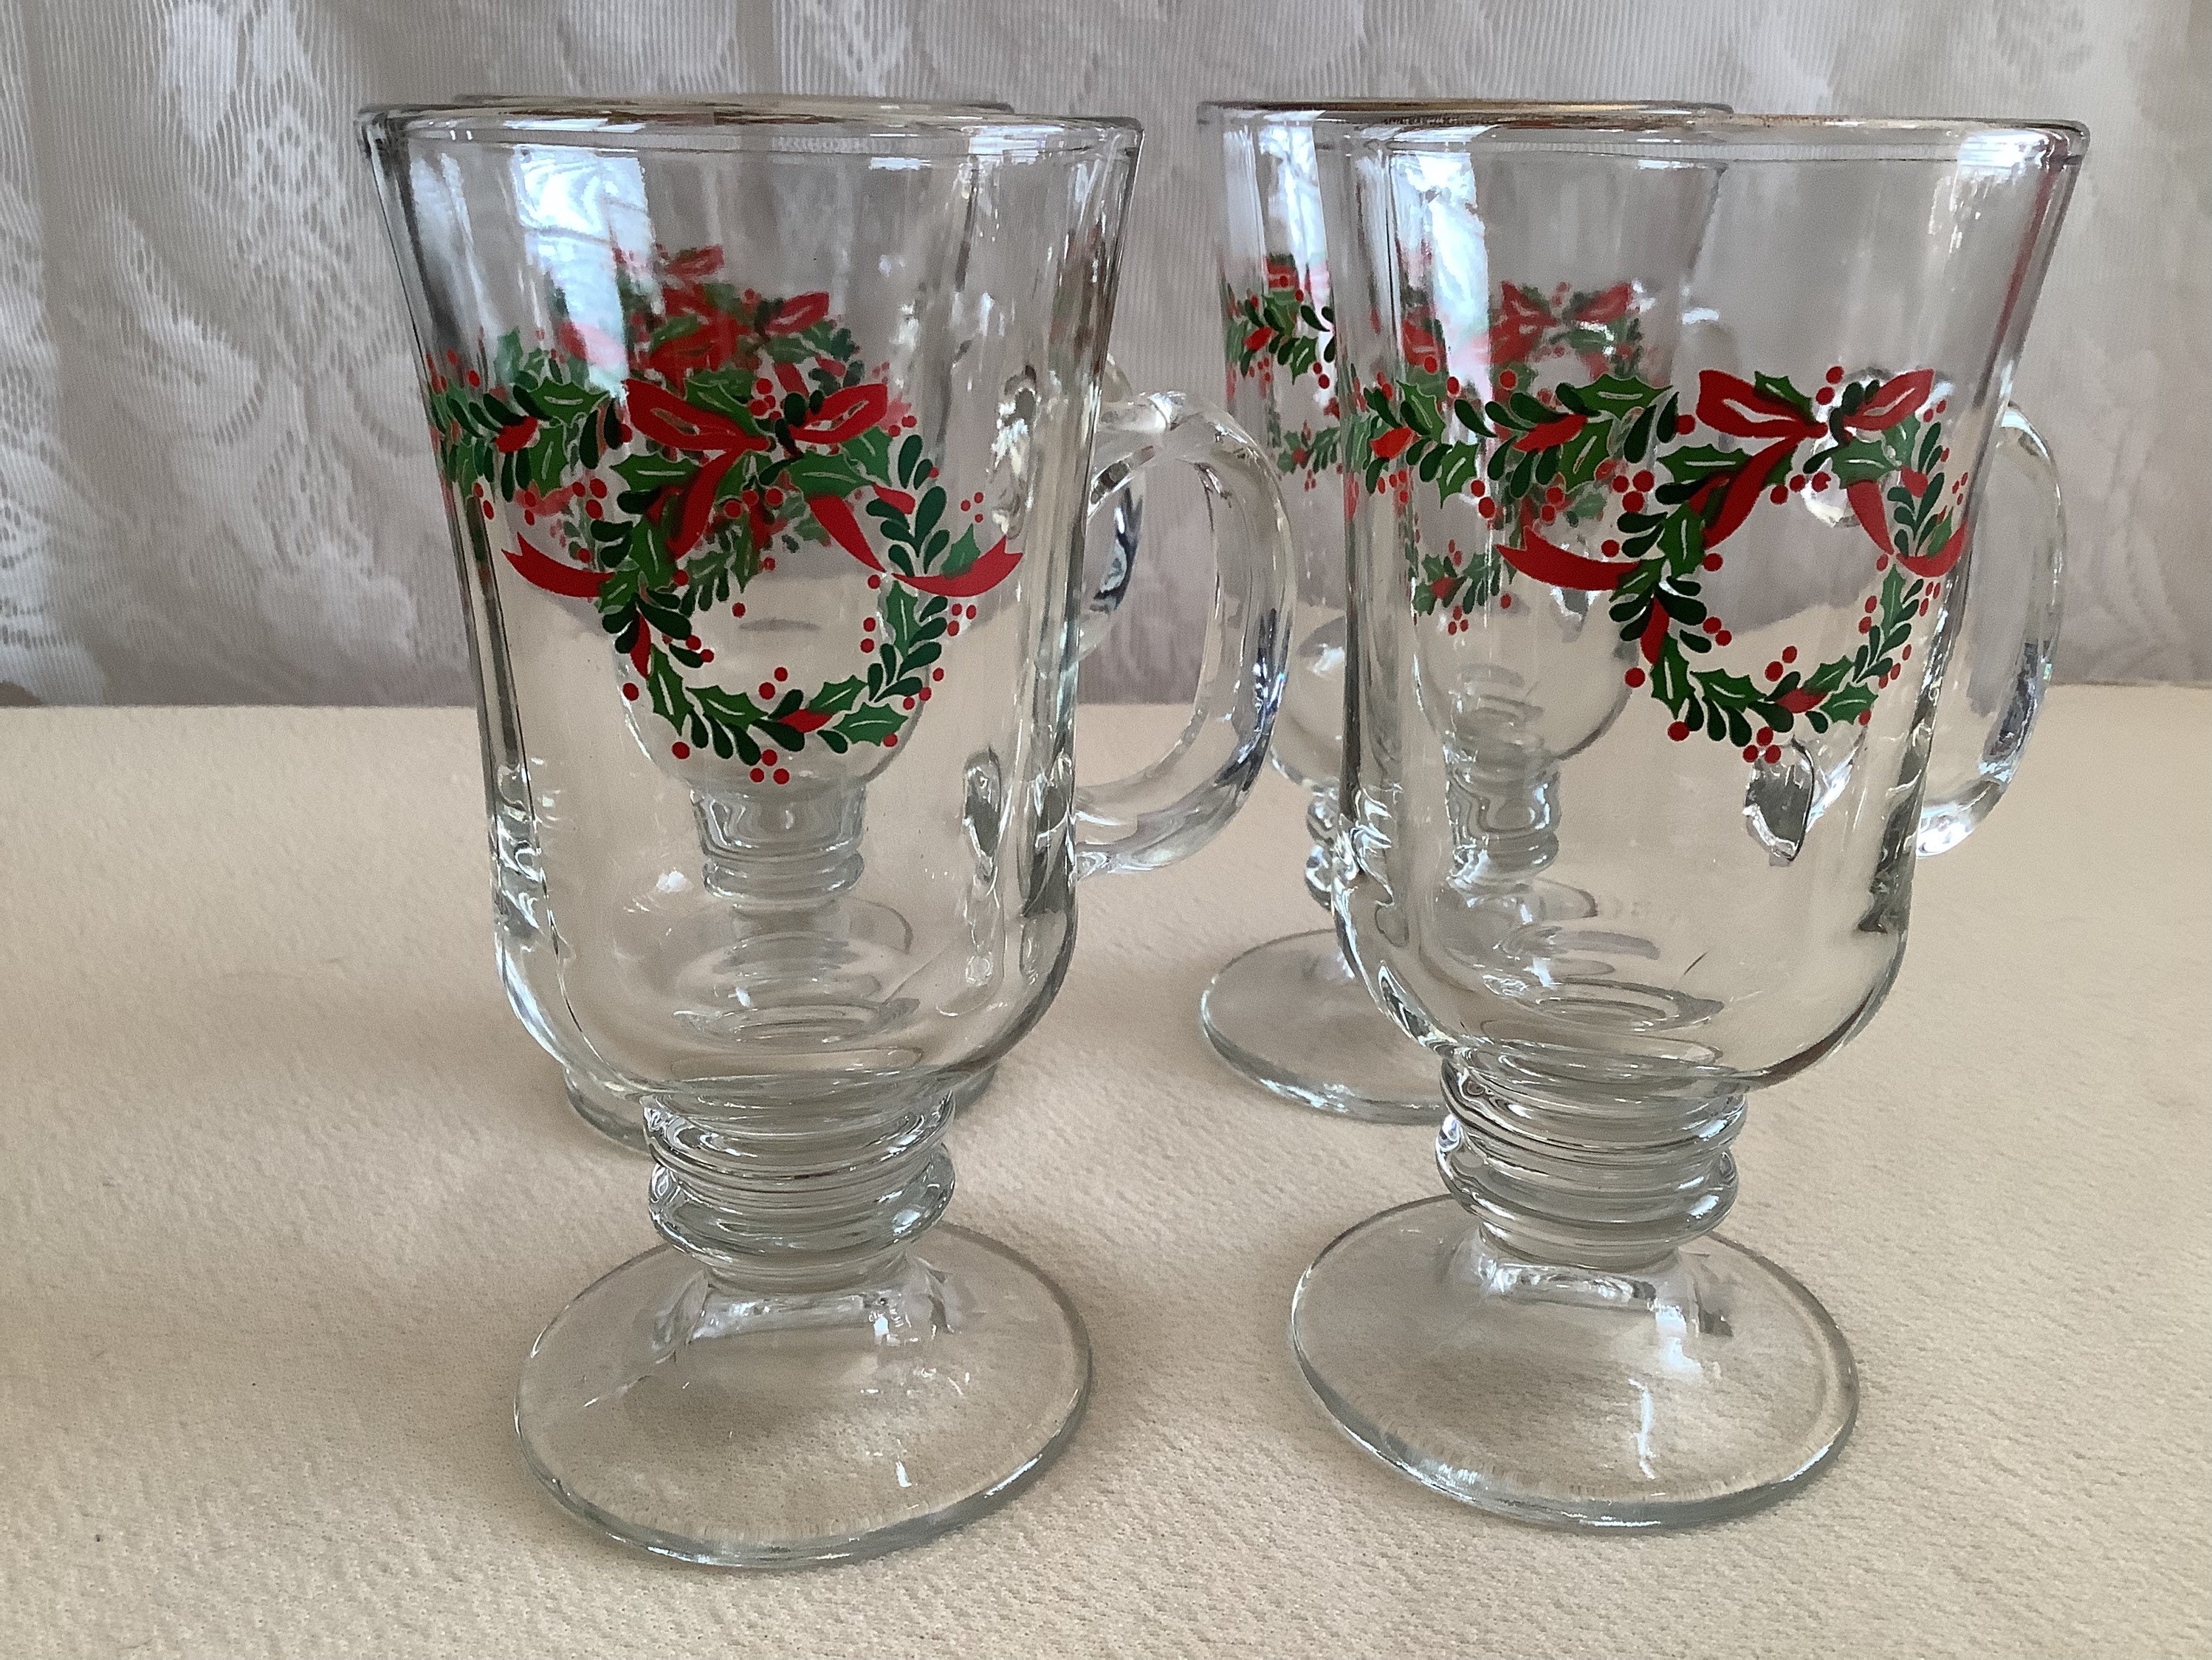 Vintage Libbey Christmas Mugs, holly Ribbon Pattern, Clear Thick Glass Mugs/ cups, Hot or Cold Drink, USA, Mint Condition, 1980s 